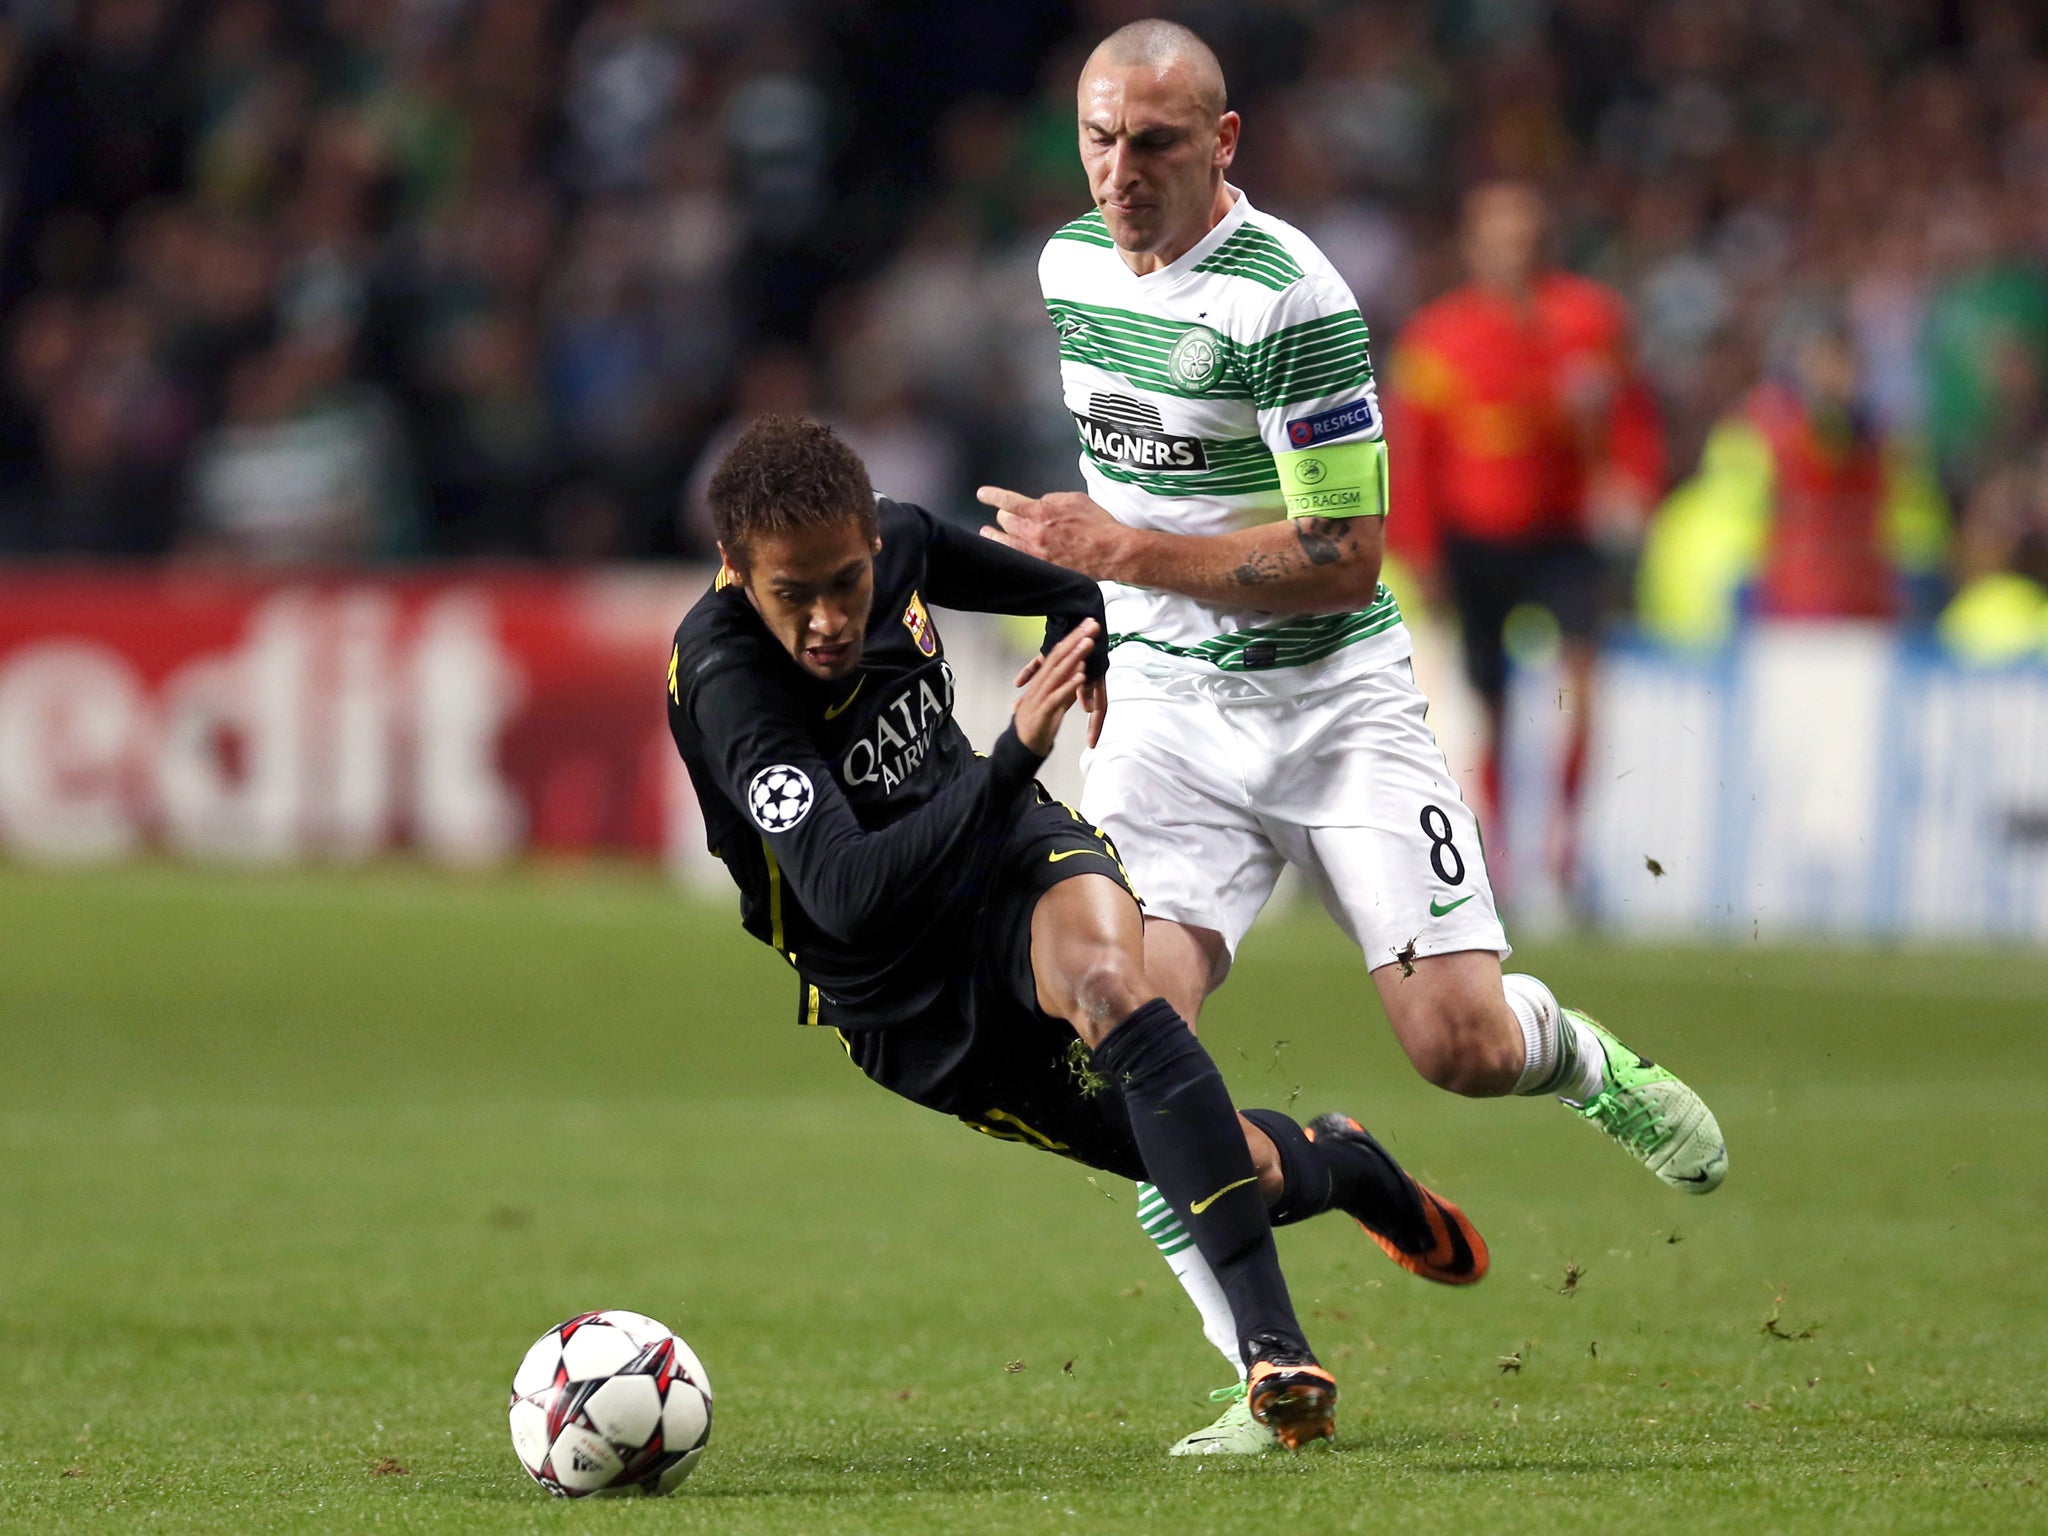 Celtic captain Scott Brown was sent off after kicking out at Barcelona forward Neymar during this challenge